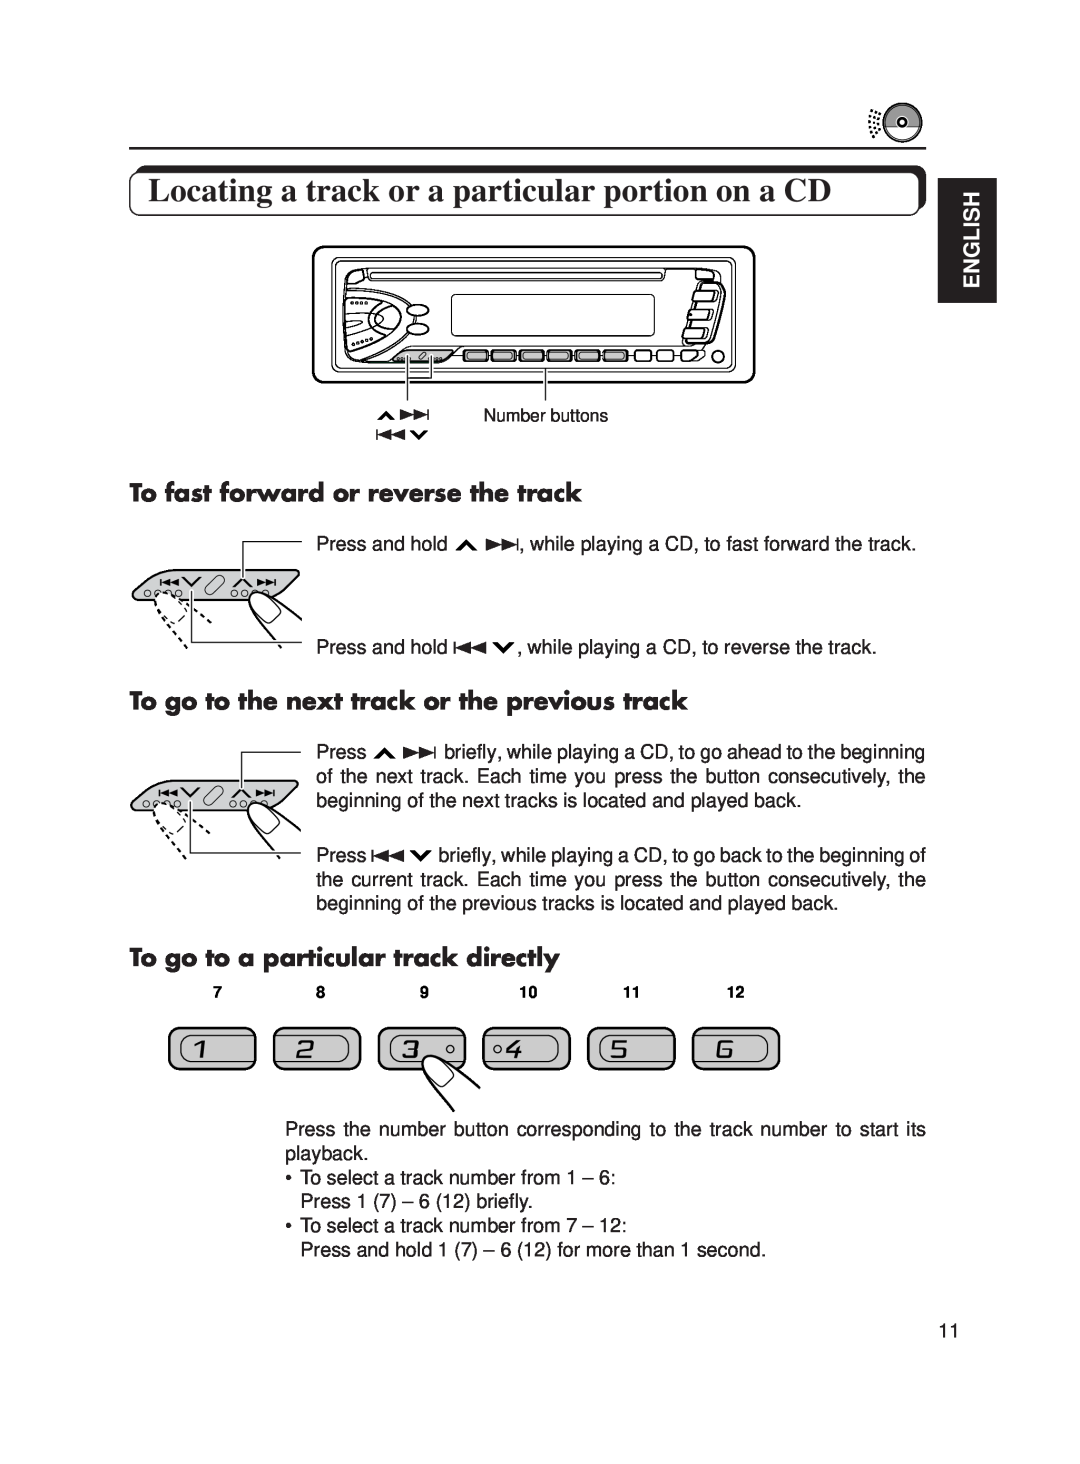 JVC KD-S620 manual Locating a track or a particular portion on a CD, To fast forward or reverse the track, English 